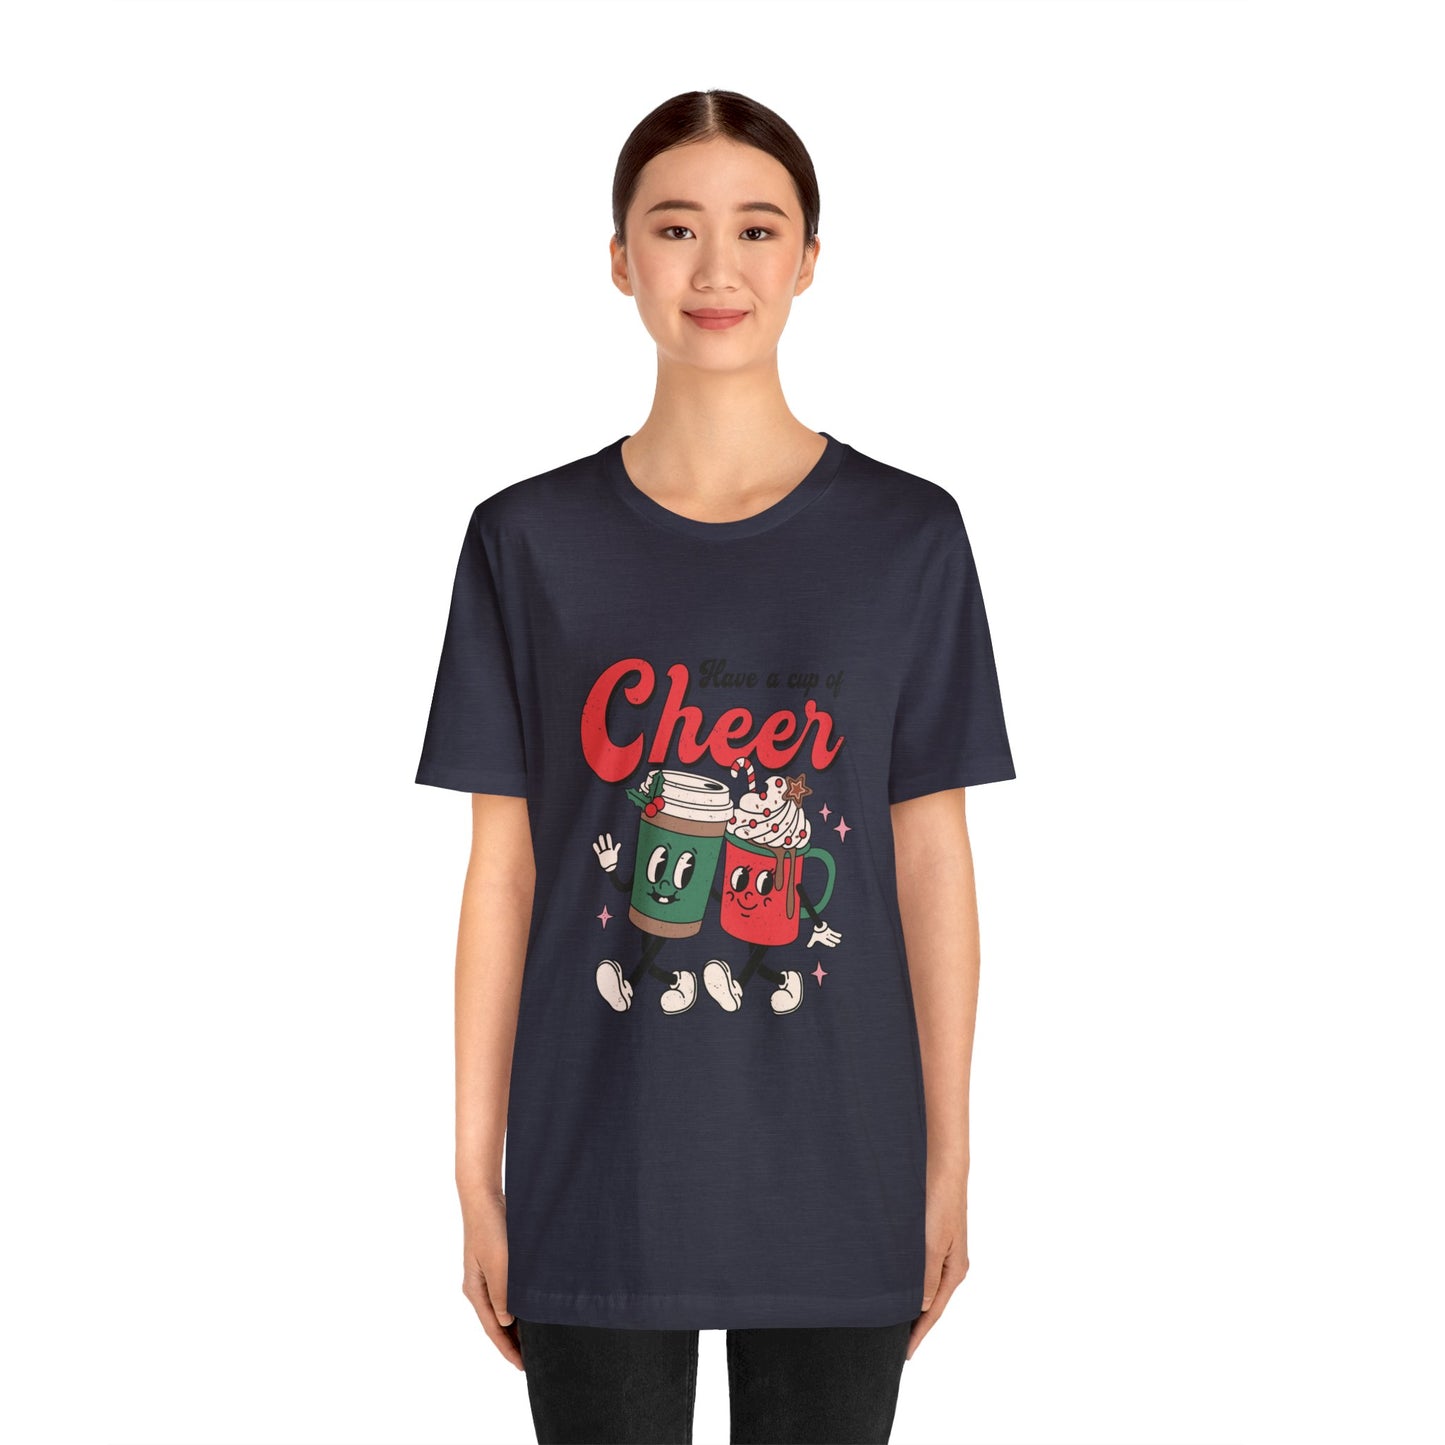 Have A Cup of Cheer Women's Short Sleeve Christmas T Shirt